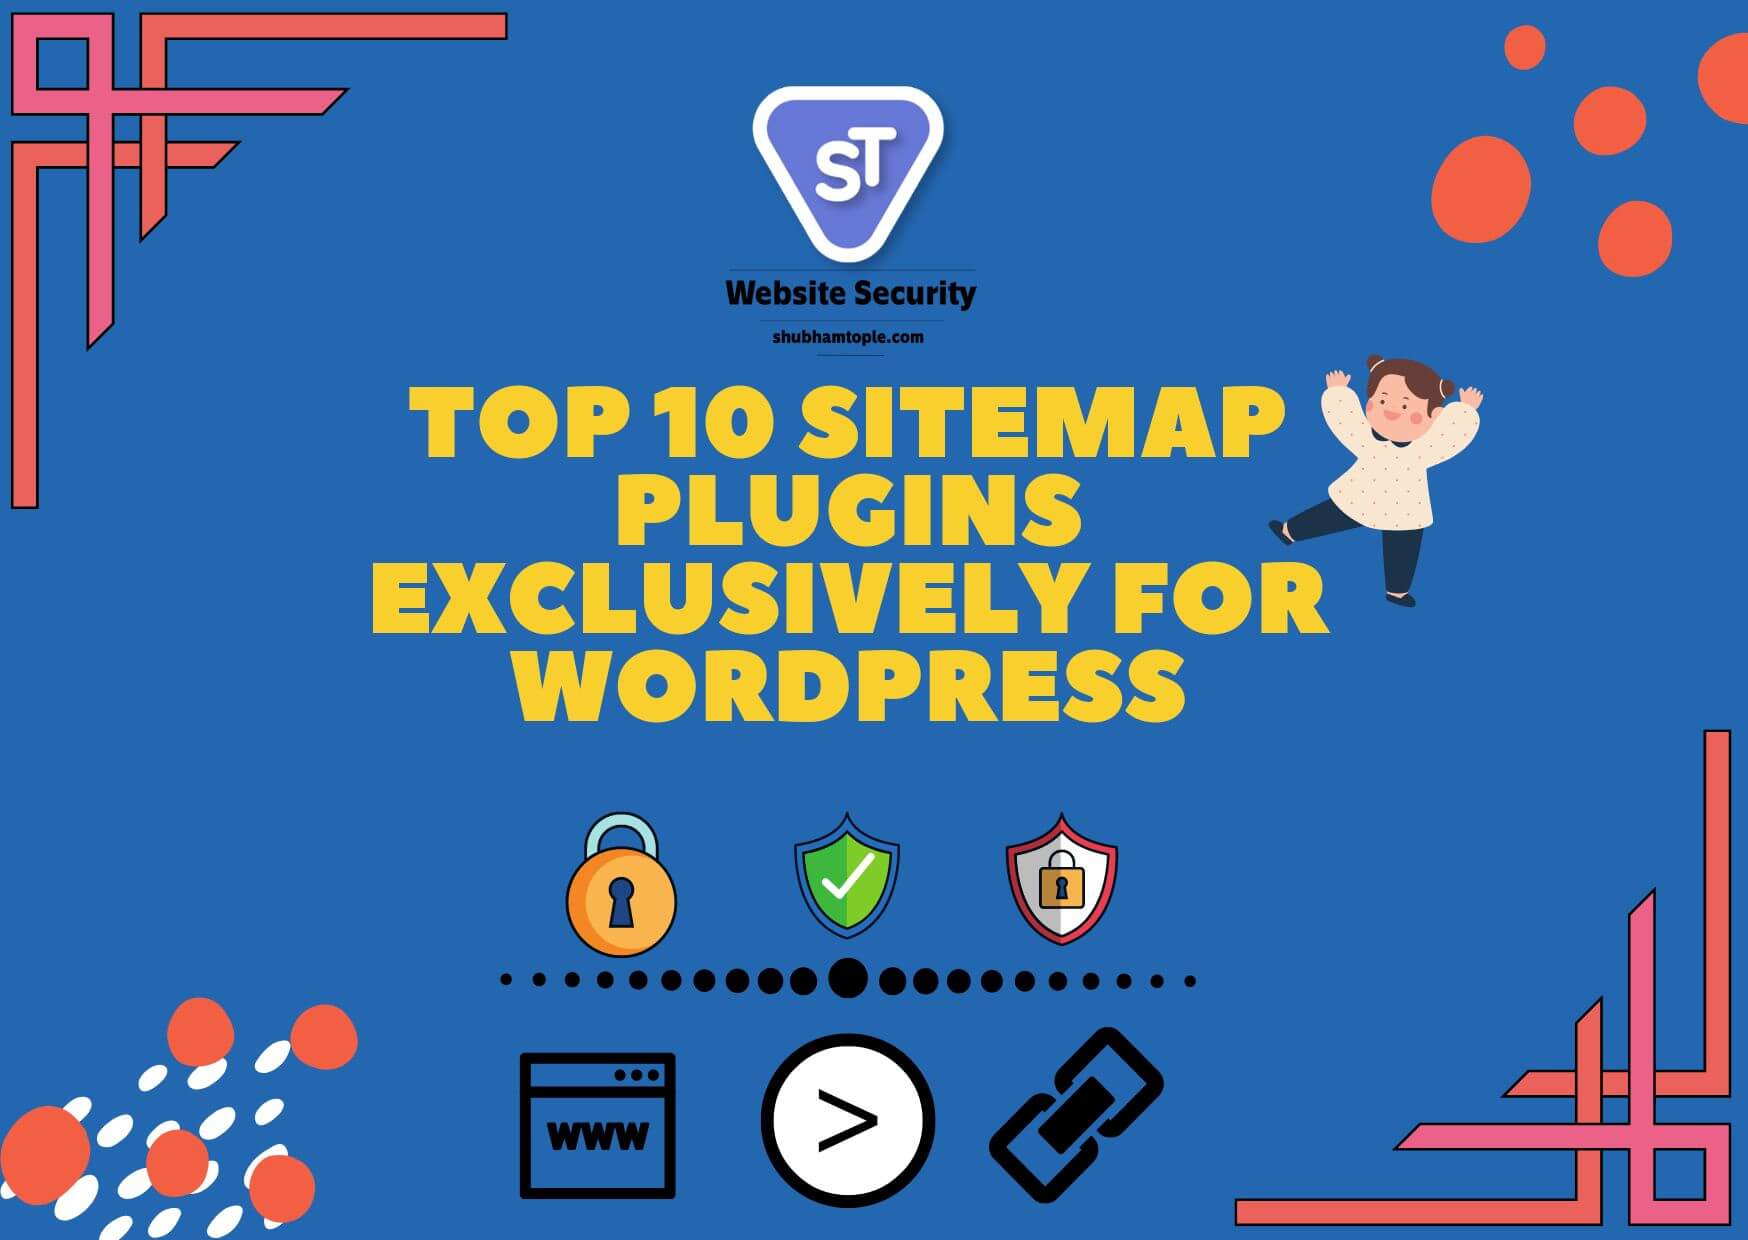 Sitemap Plugins Exclusively For WordPress